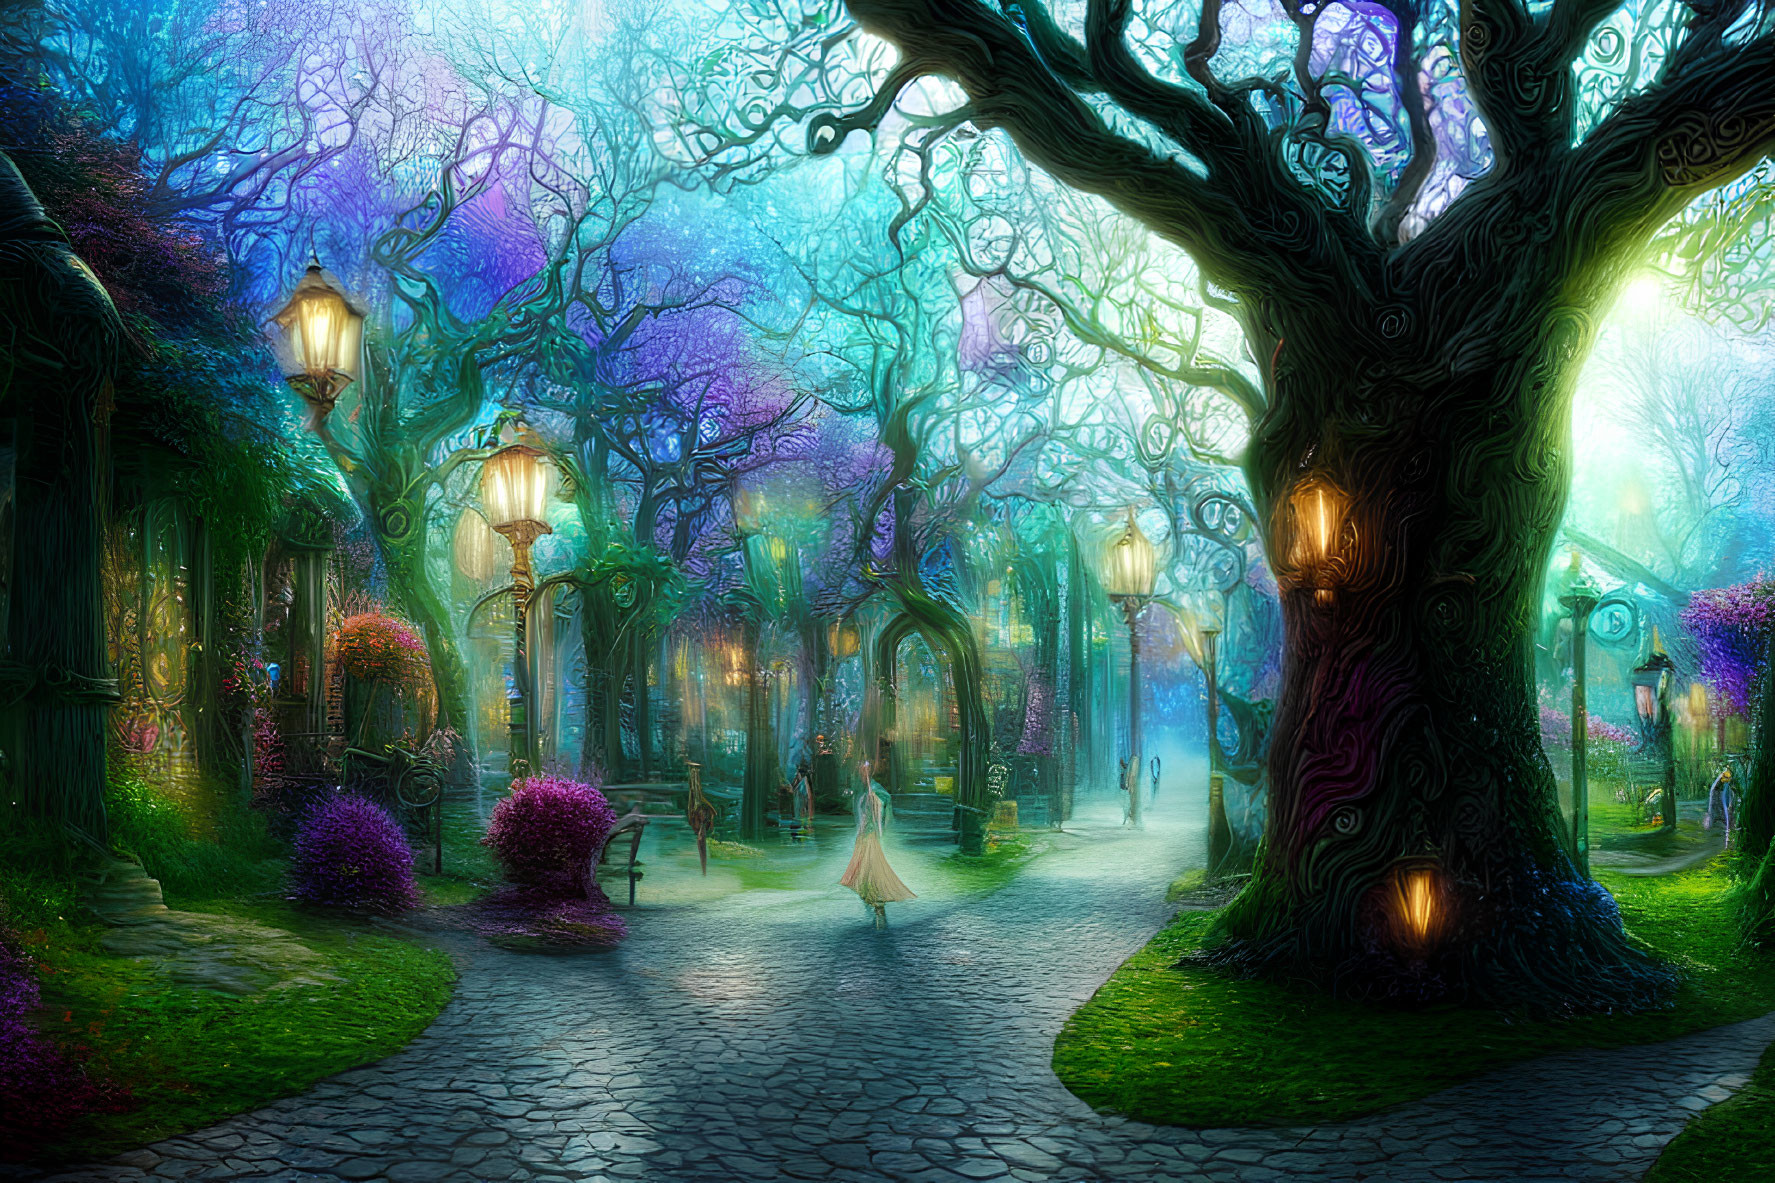 Twisting trees and violet foliage lead to enchanted village